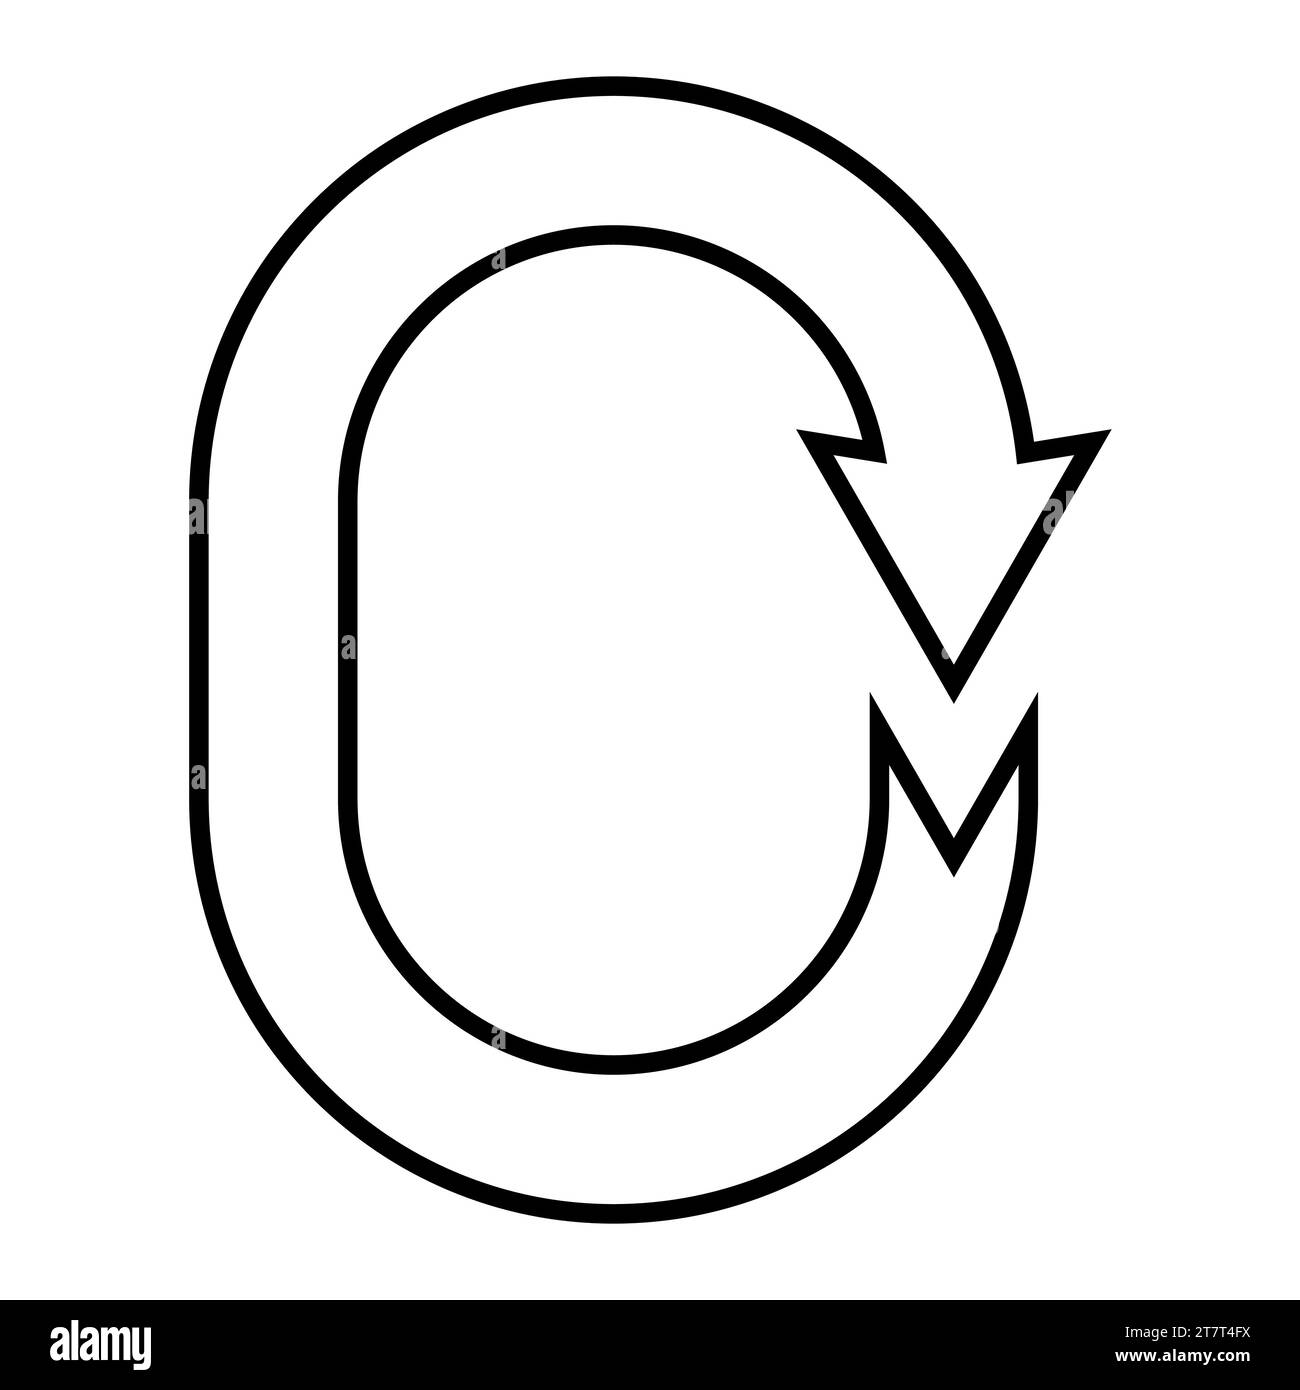 Letter c sign connecting, connect letter c with arrow Stock Vector